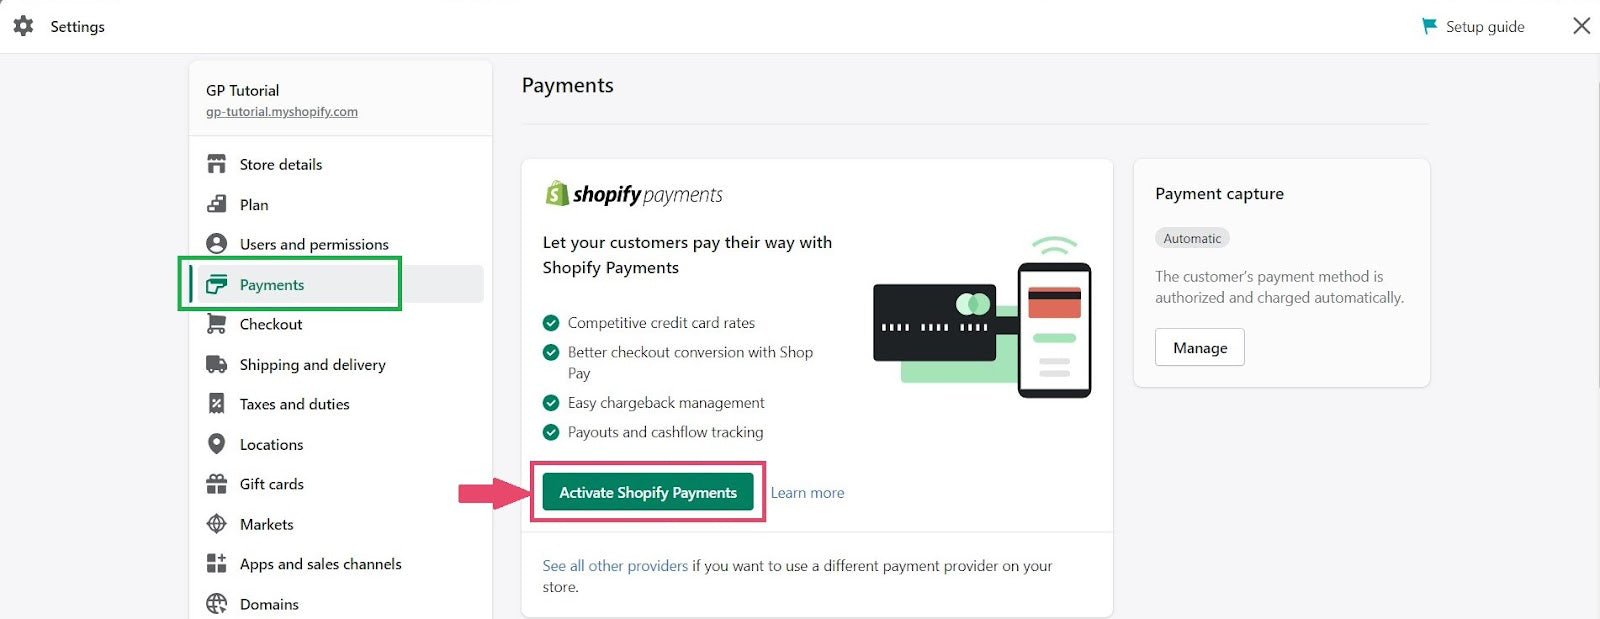 Shopify settings for Payments